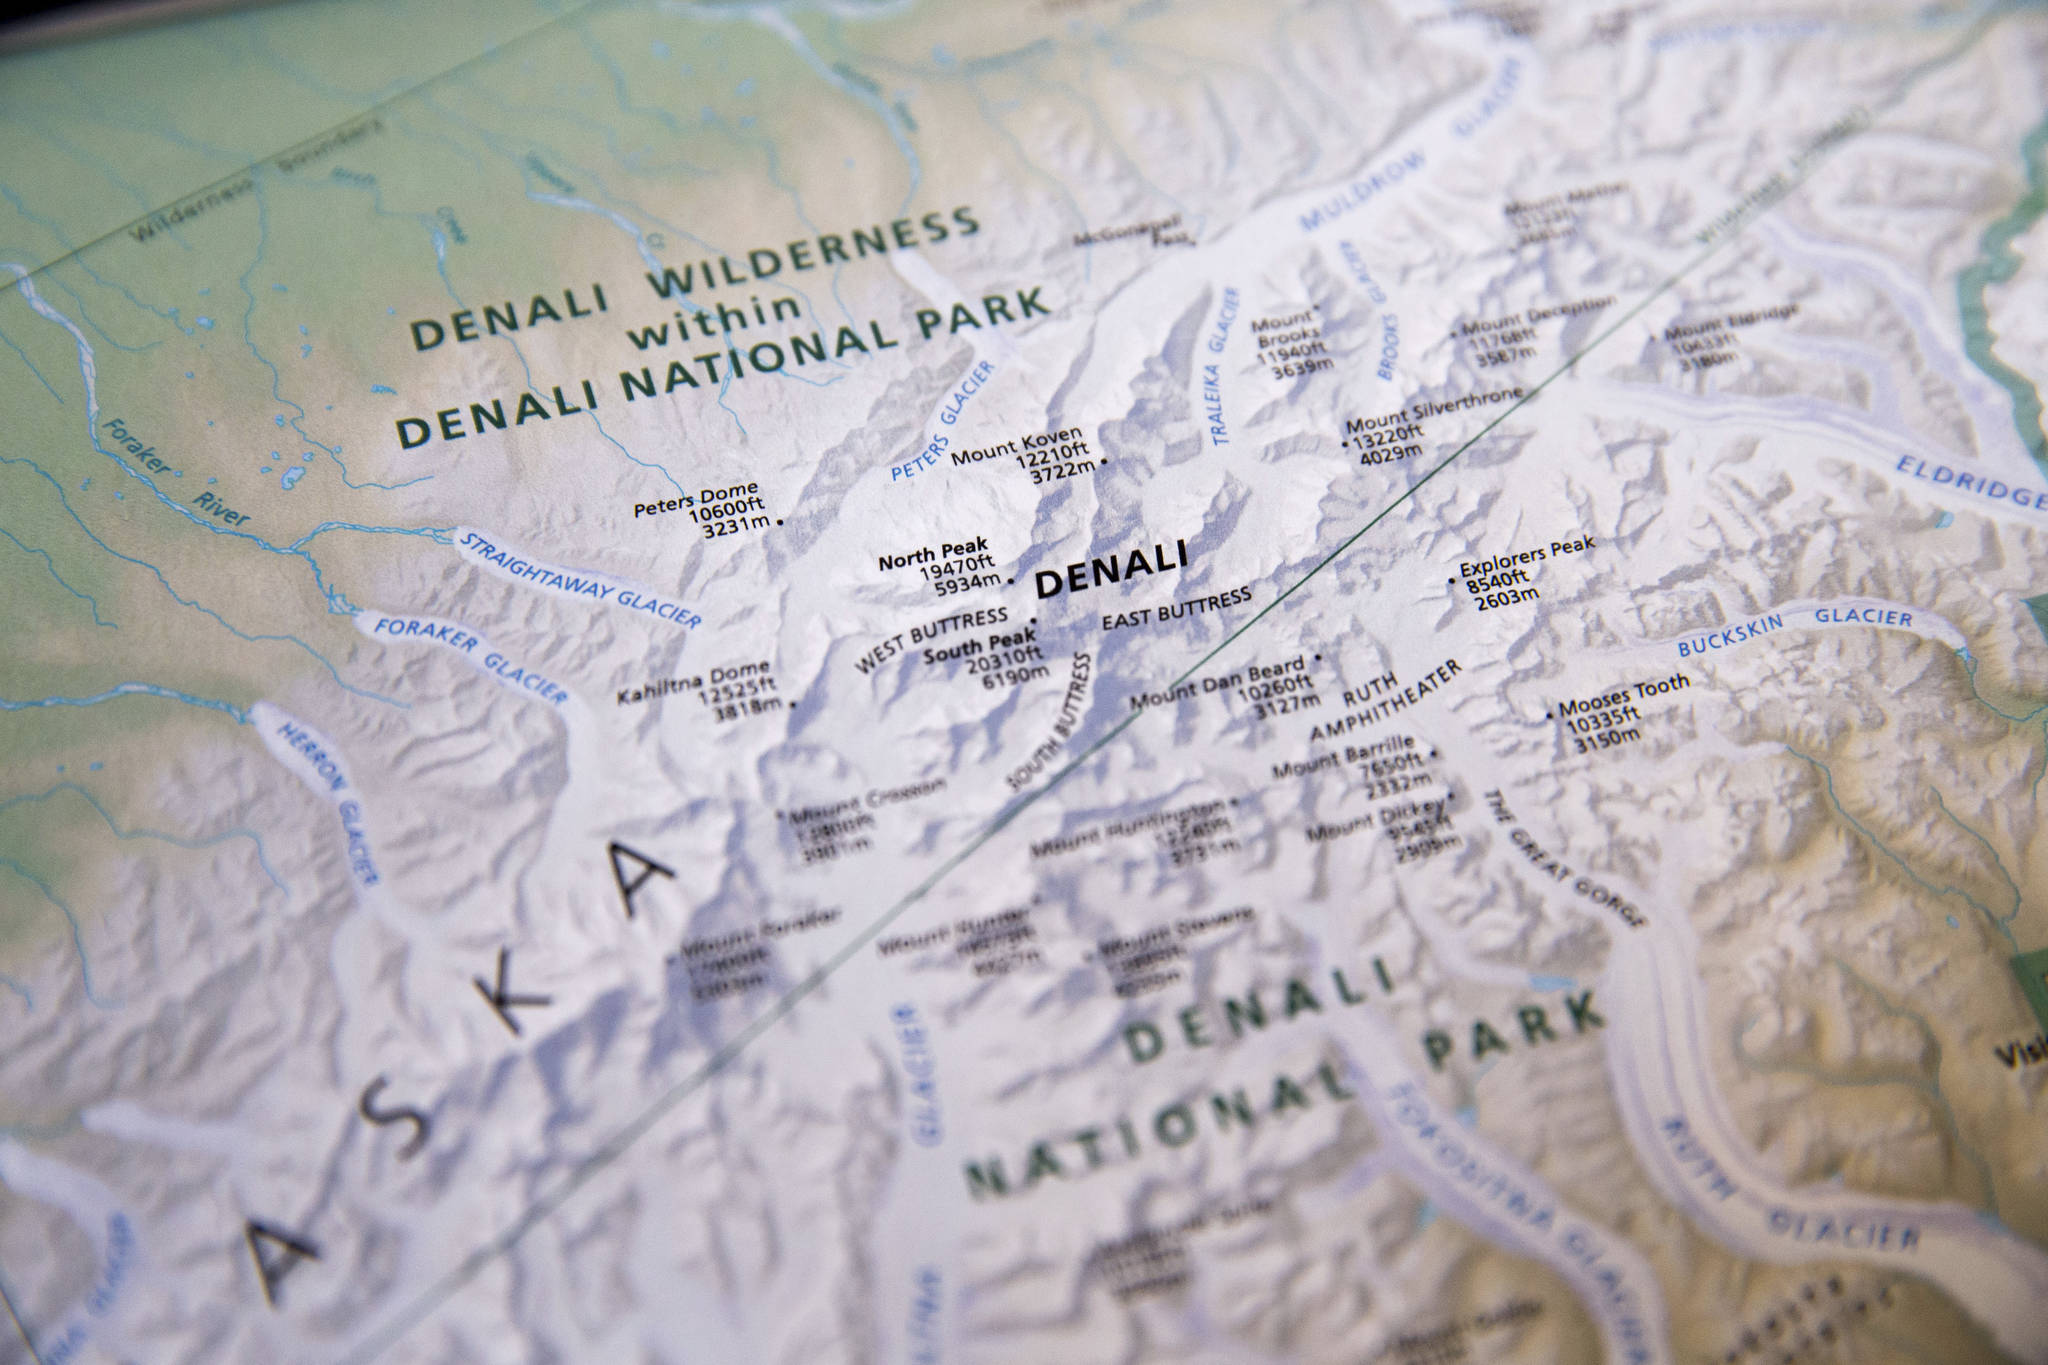 A National Park Service map depicting the renamed Denali is shown on Monday, Aug. 31, 2015. Rangers who keep an eye on North America’s highest mountain peak say they are seeing impatient and inexperienced climbers take more risks and put their lives and other climbers in danger In 2021. (AP Photo/Andrew Harnik)